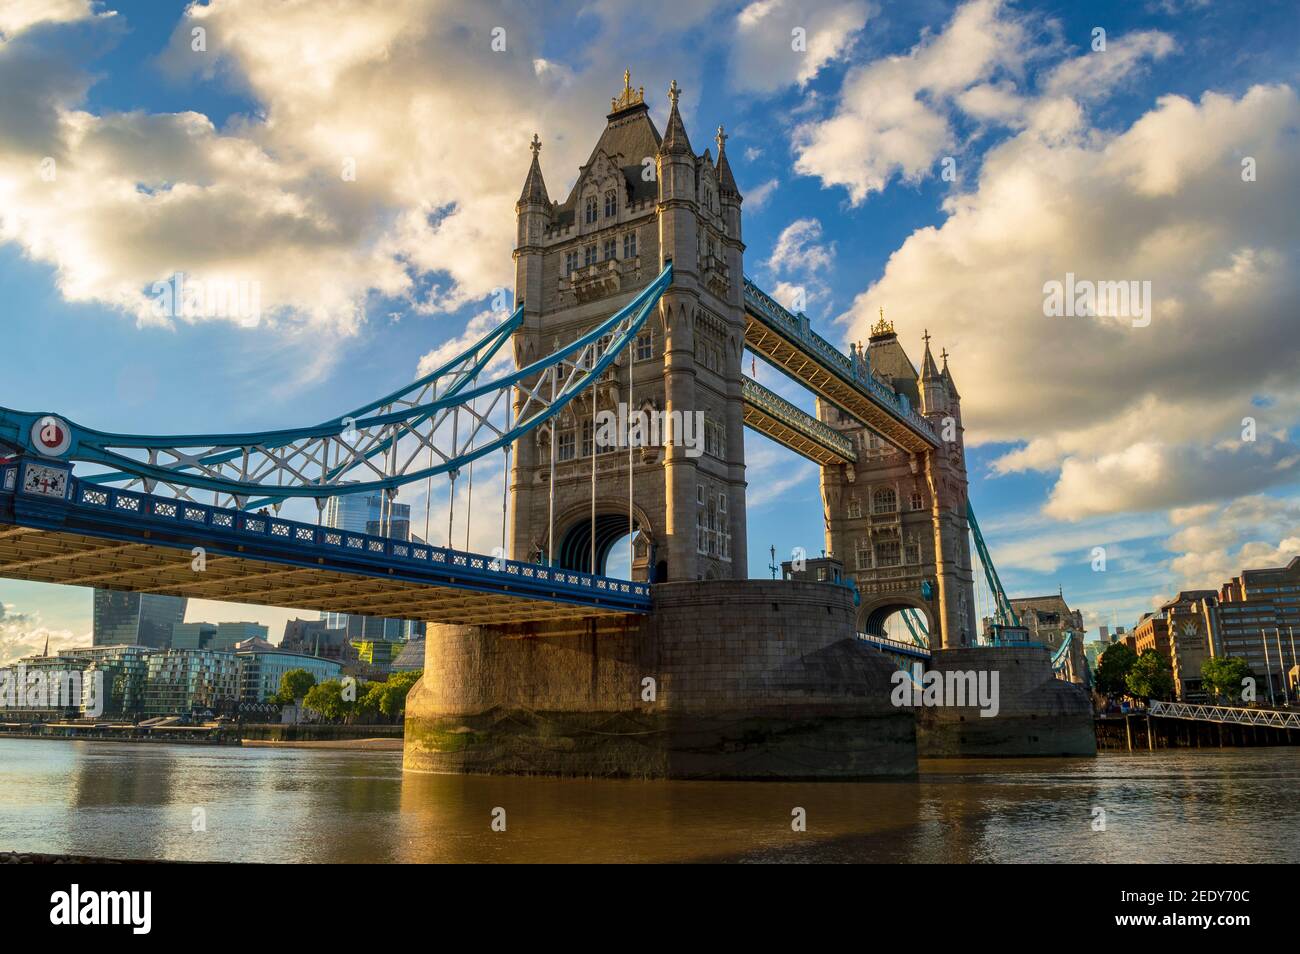 Warm summers day in Tower bridge provides a nice glow to the bridge. Stock Photo